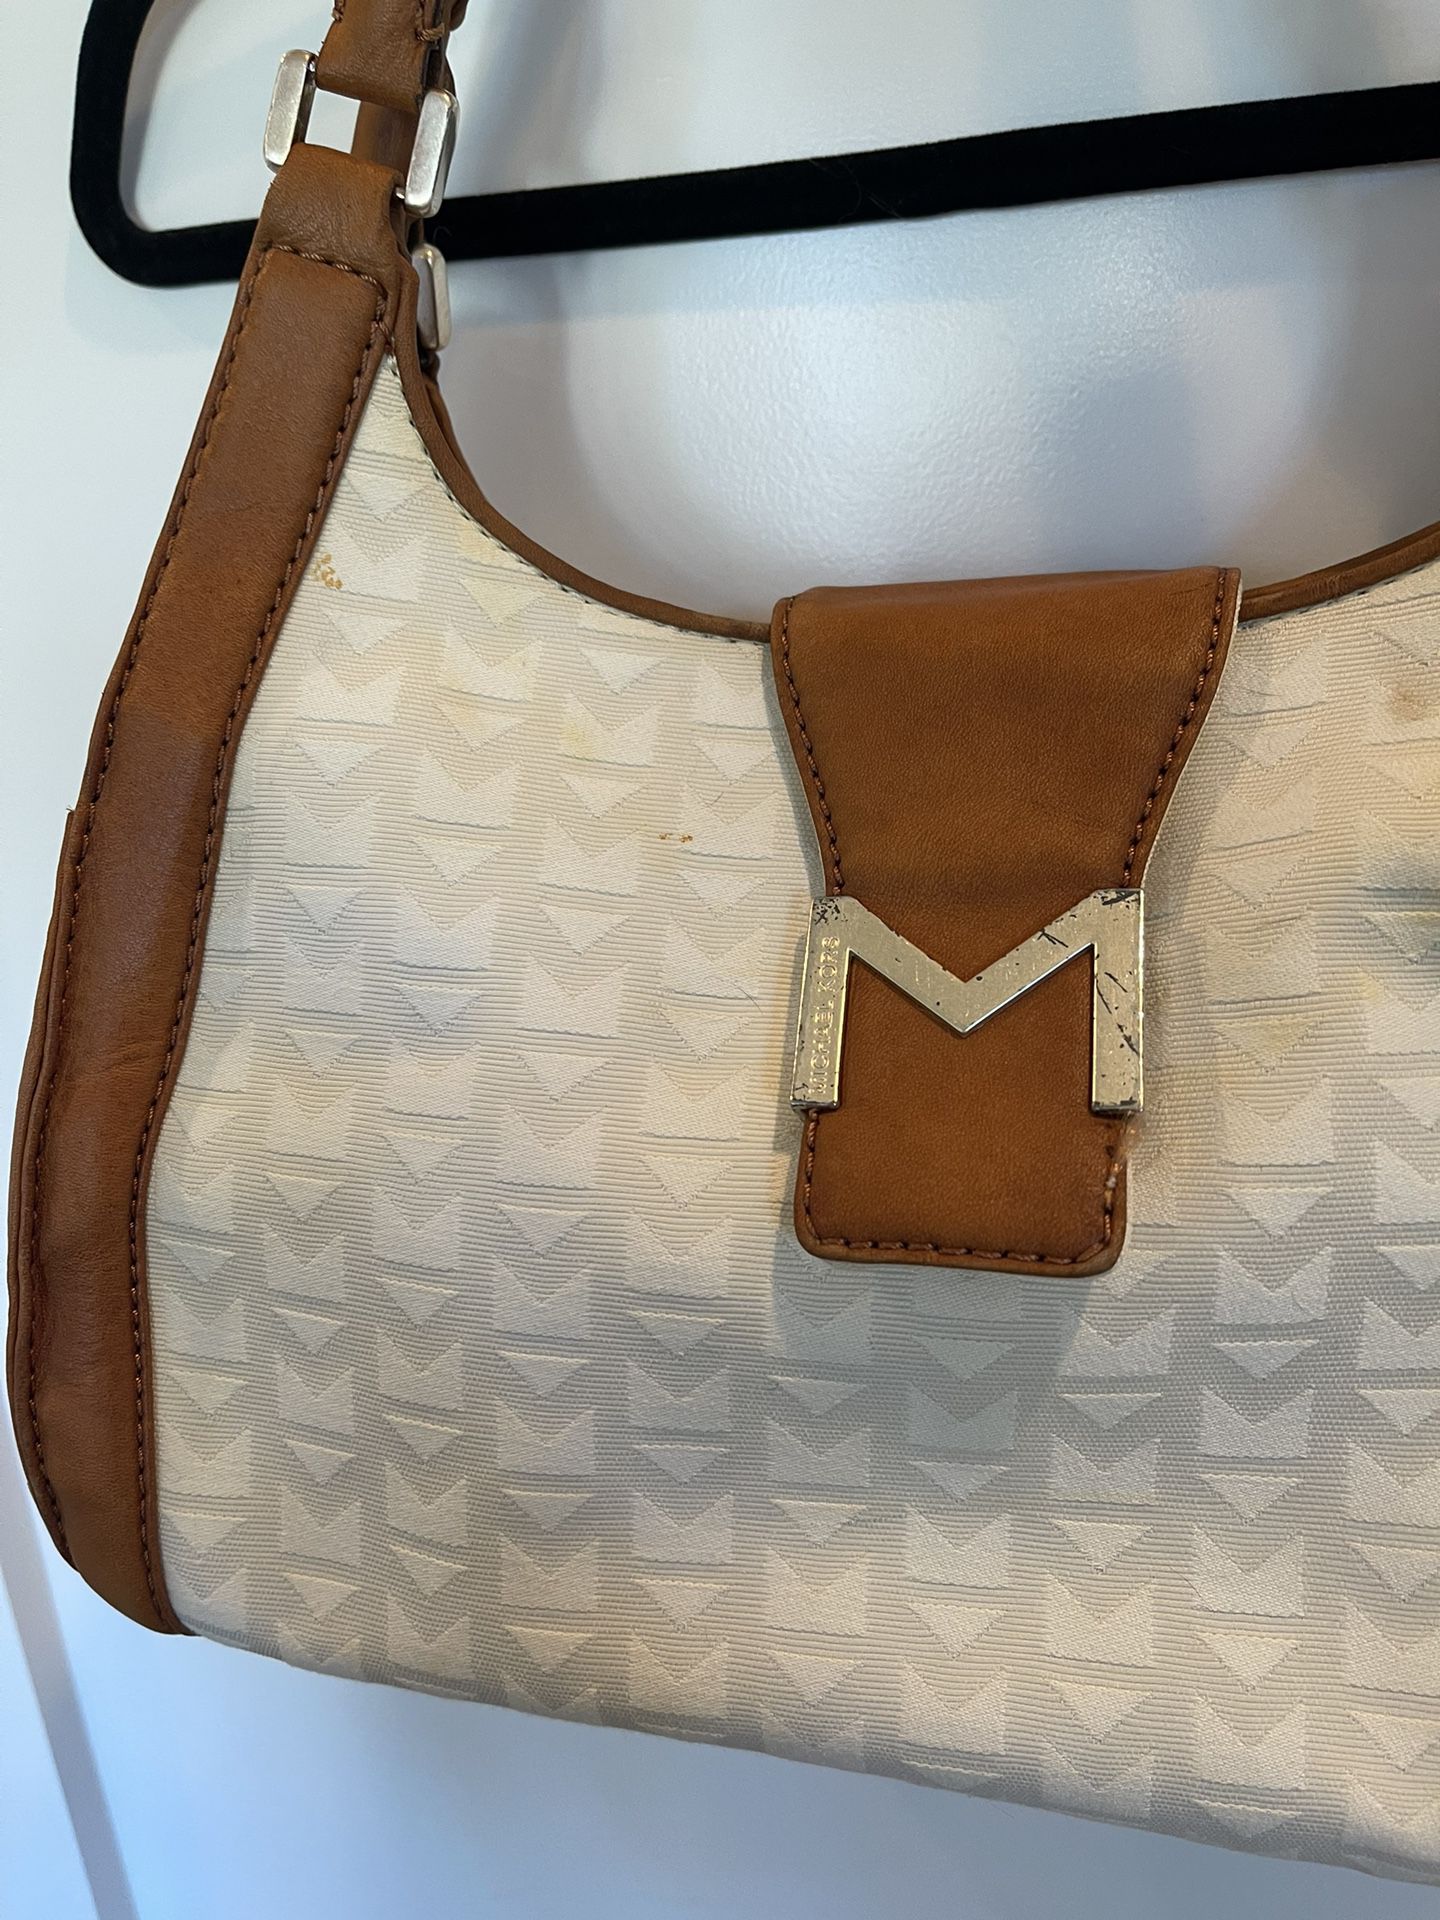 Michael Kors Vintage Monogrammed Canvas and Leather Hobo Purse for Sale in  Murfreesboro, TN - OfferUp